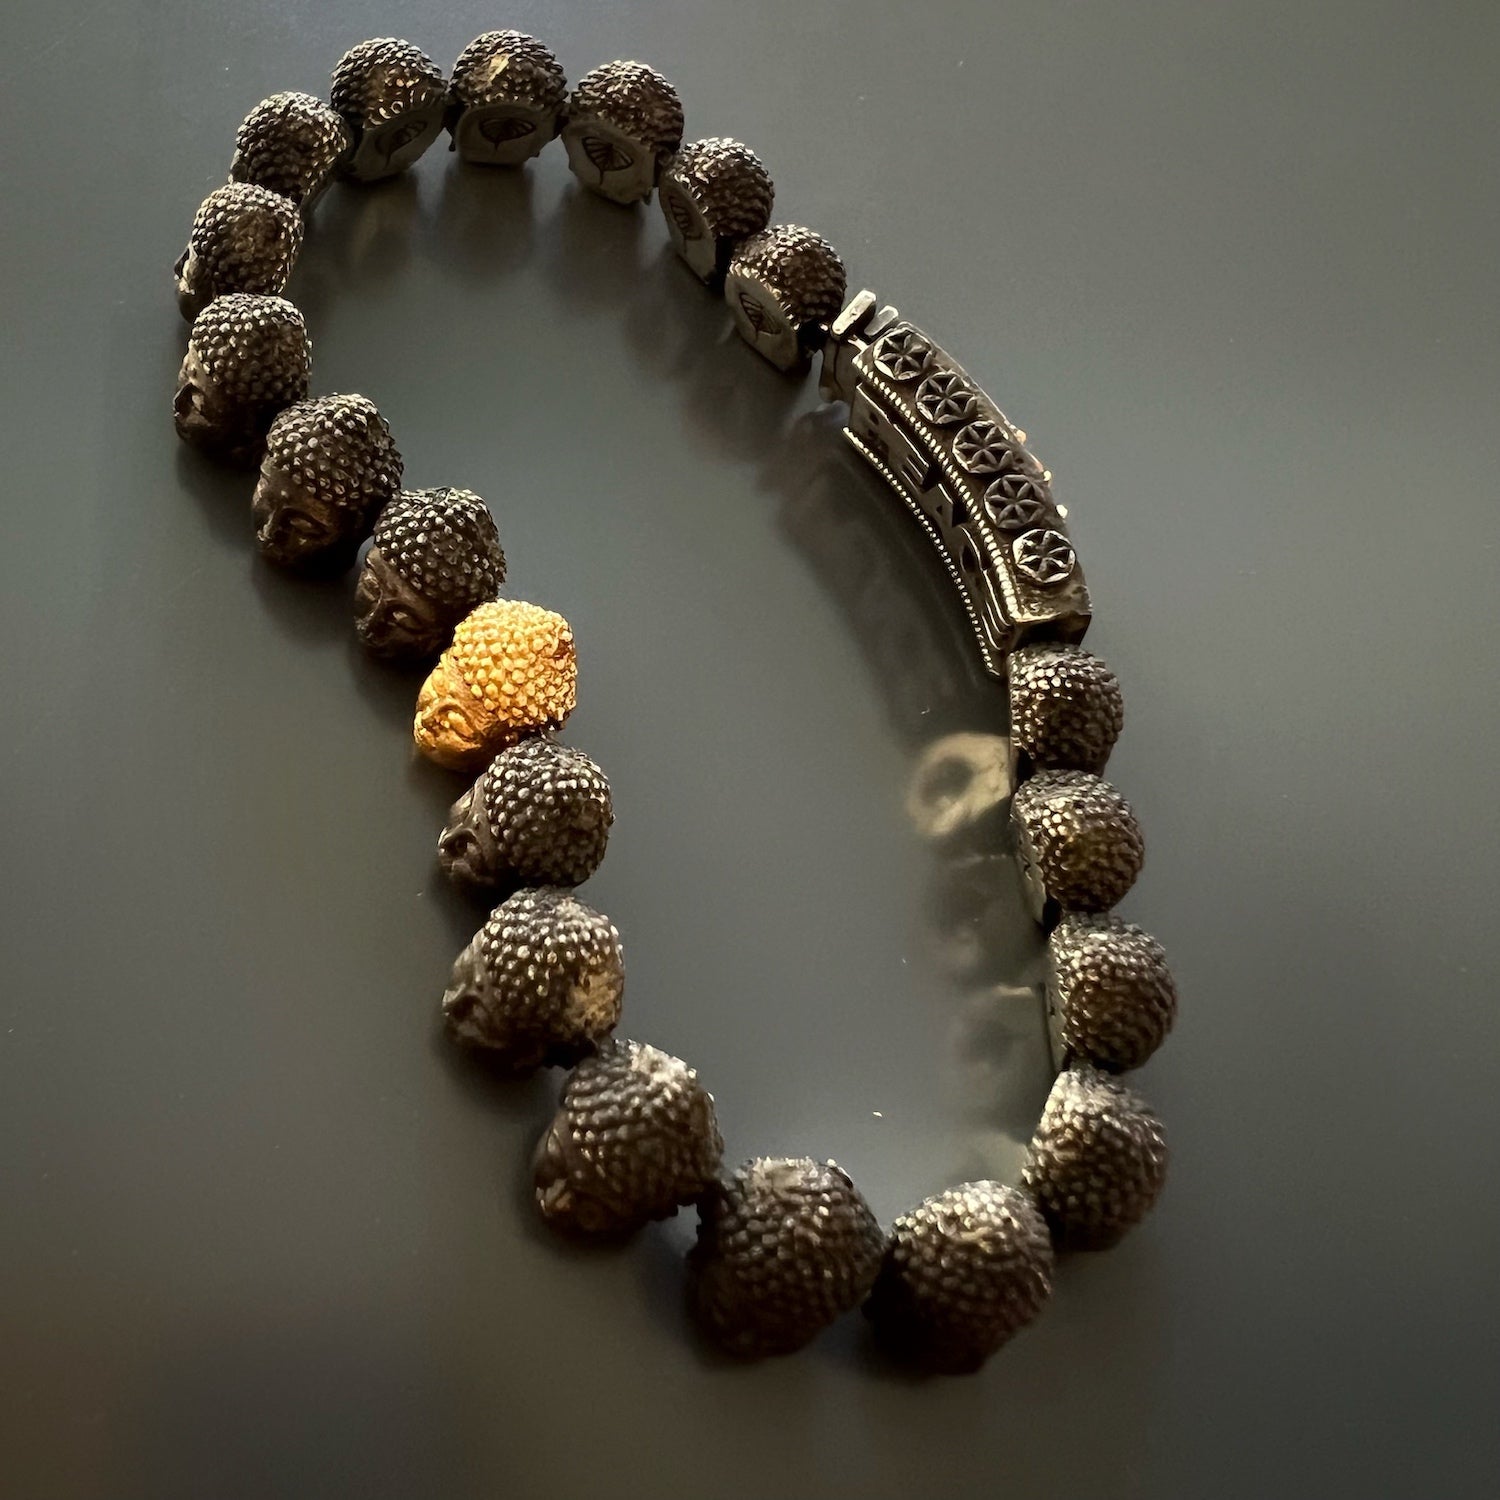 Handcrafted in the USA - Buddha Bracelet, crafted with care and precision.